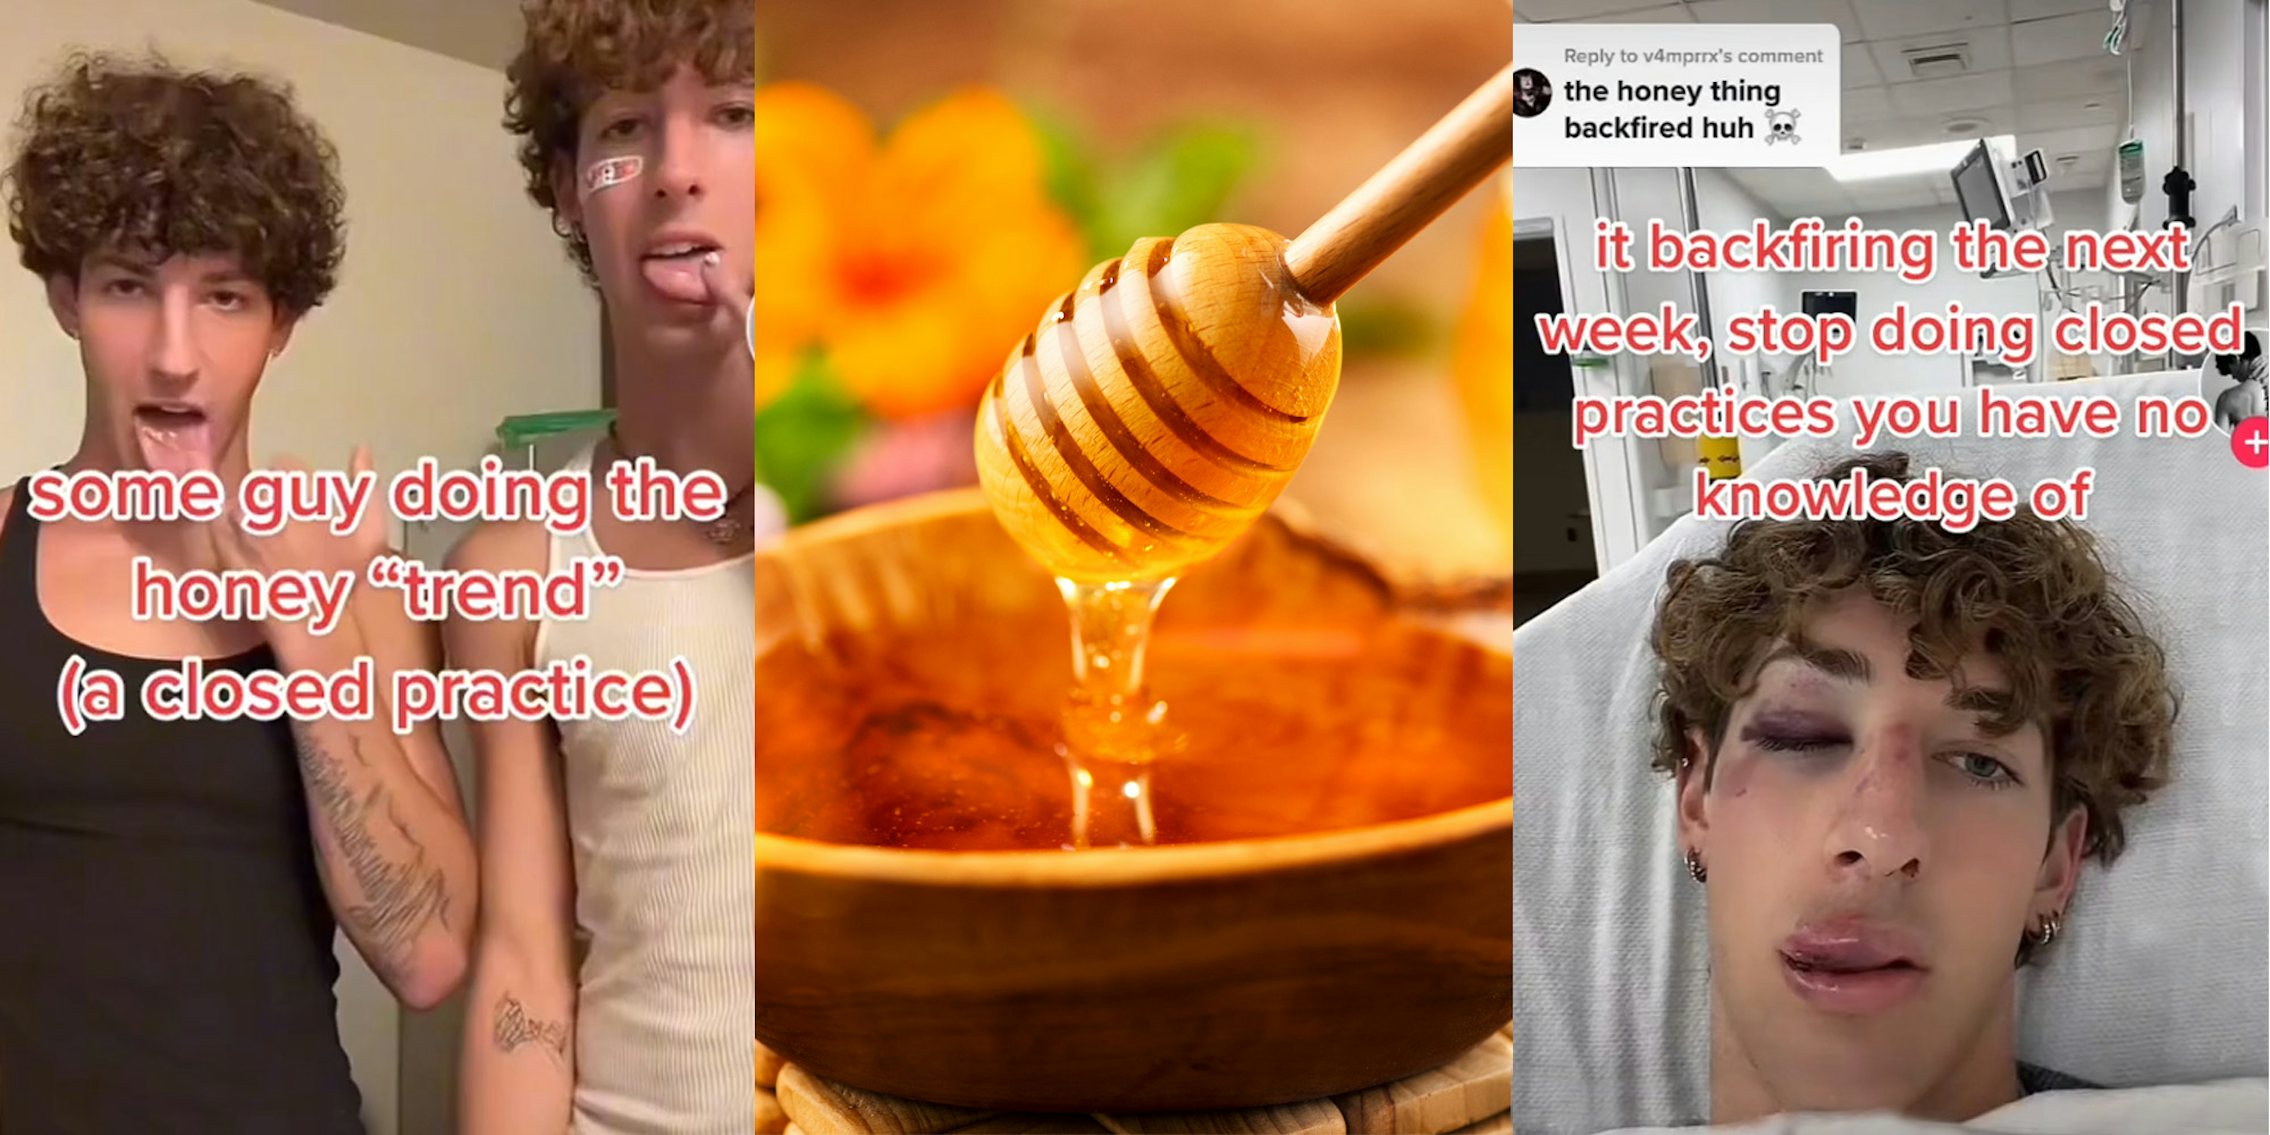 men sticking tongues out putting honey caption 'some guy doing the honey 'trend' (a closed practice) (l) honey dripping off of honey dipper (c) man in hospital caption 'the honey thing backfired huh' 'it backfired the next week, stop doing closed practices you have no knowledge of' (r)